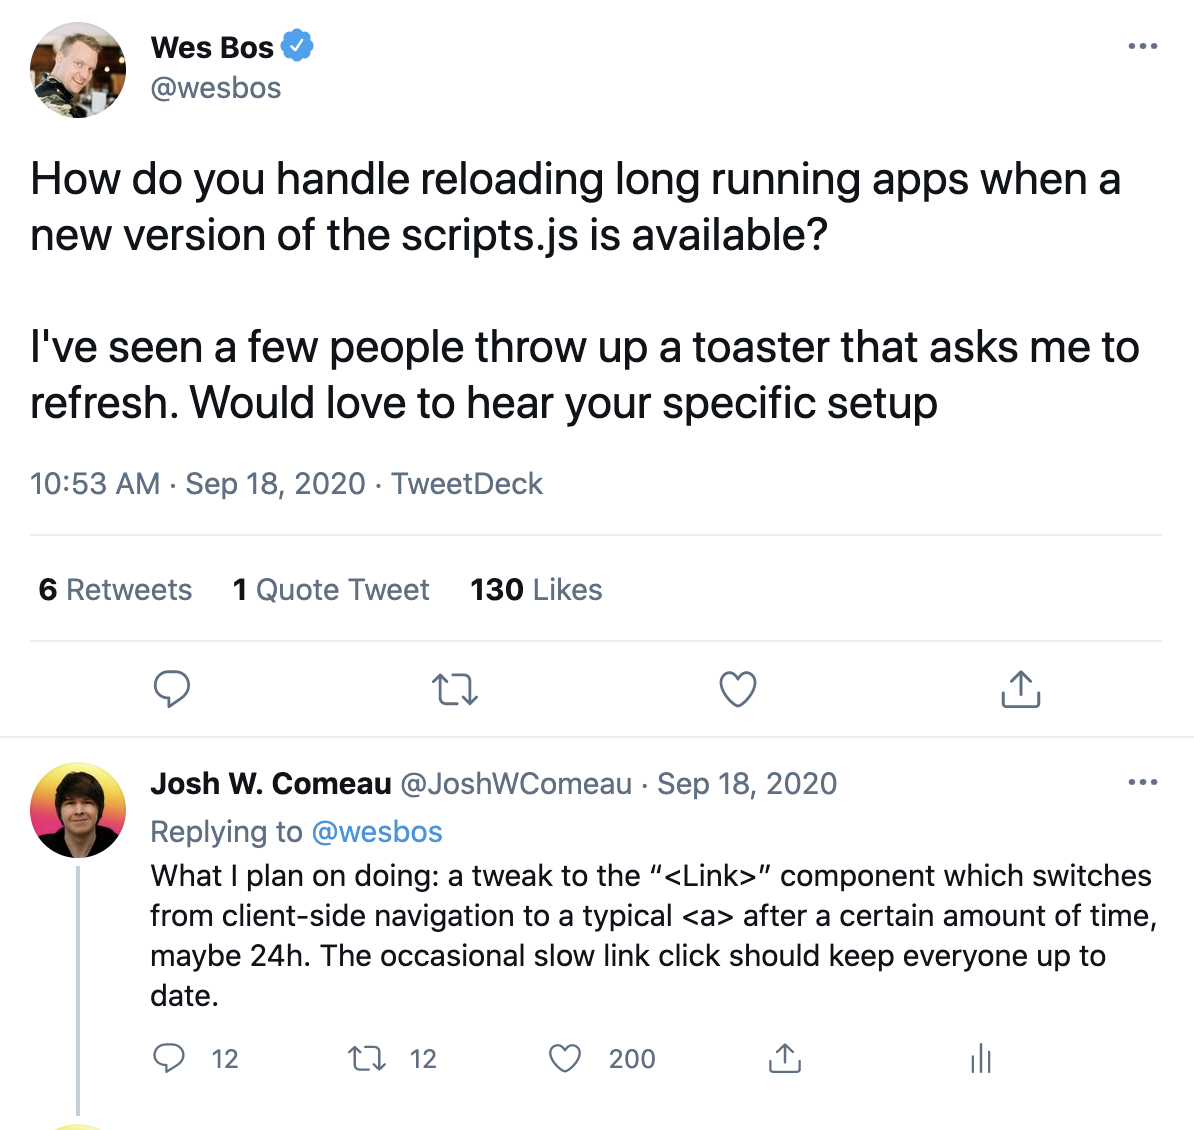 A tweet from Wes Bos asking about stale JS bundles